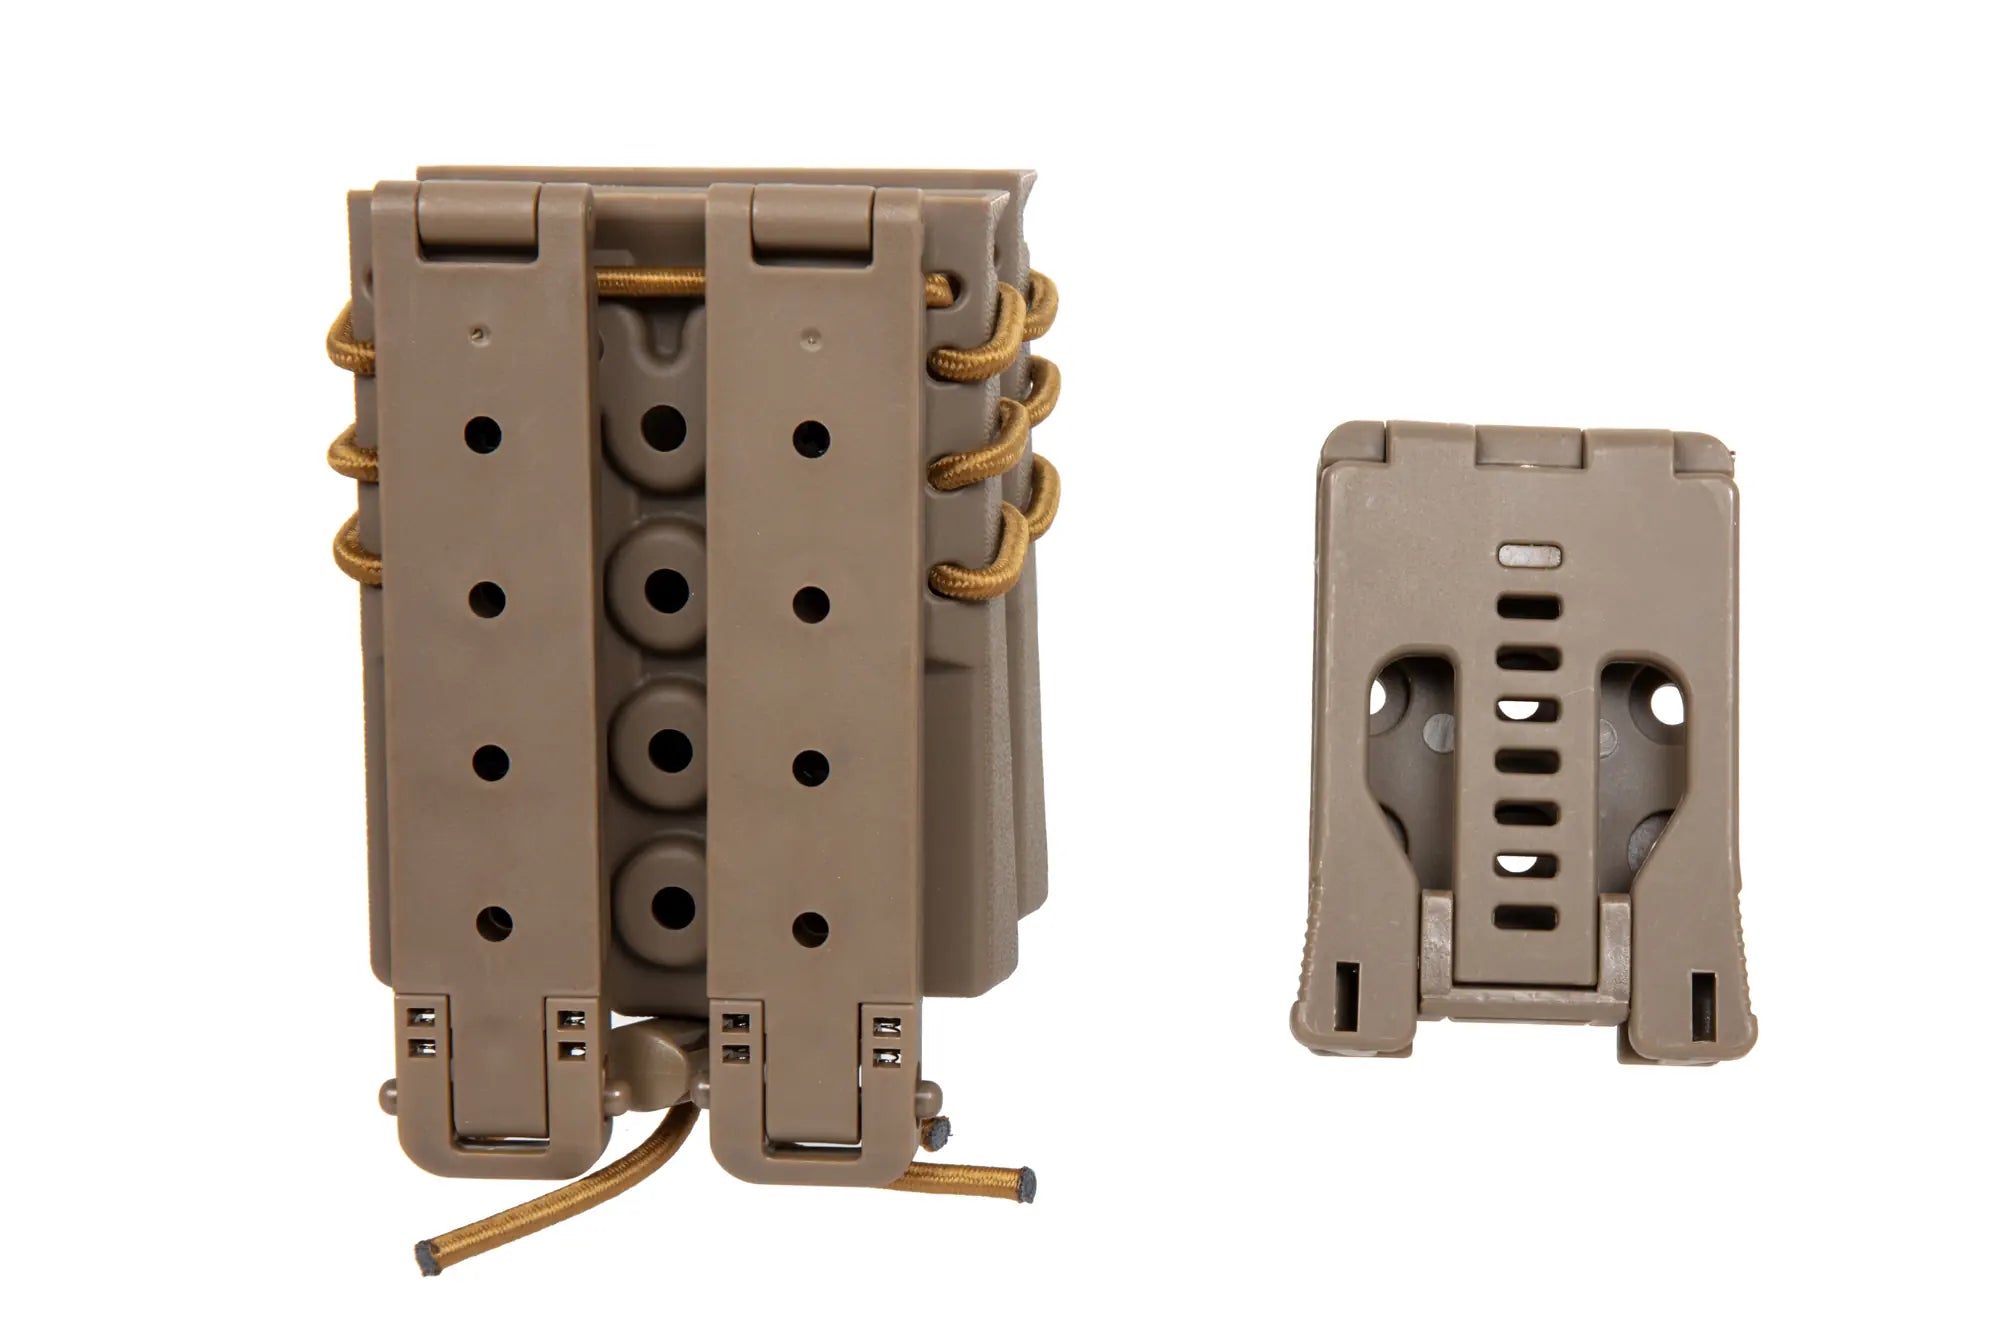 Carrier for 2 M4/M16 magazines Wosport Urban Assault Quick Pull Tan-1